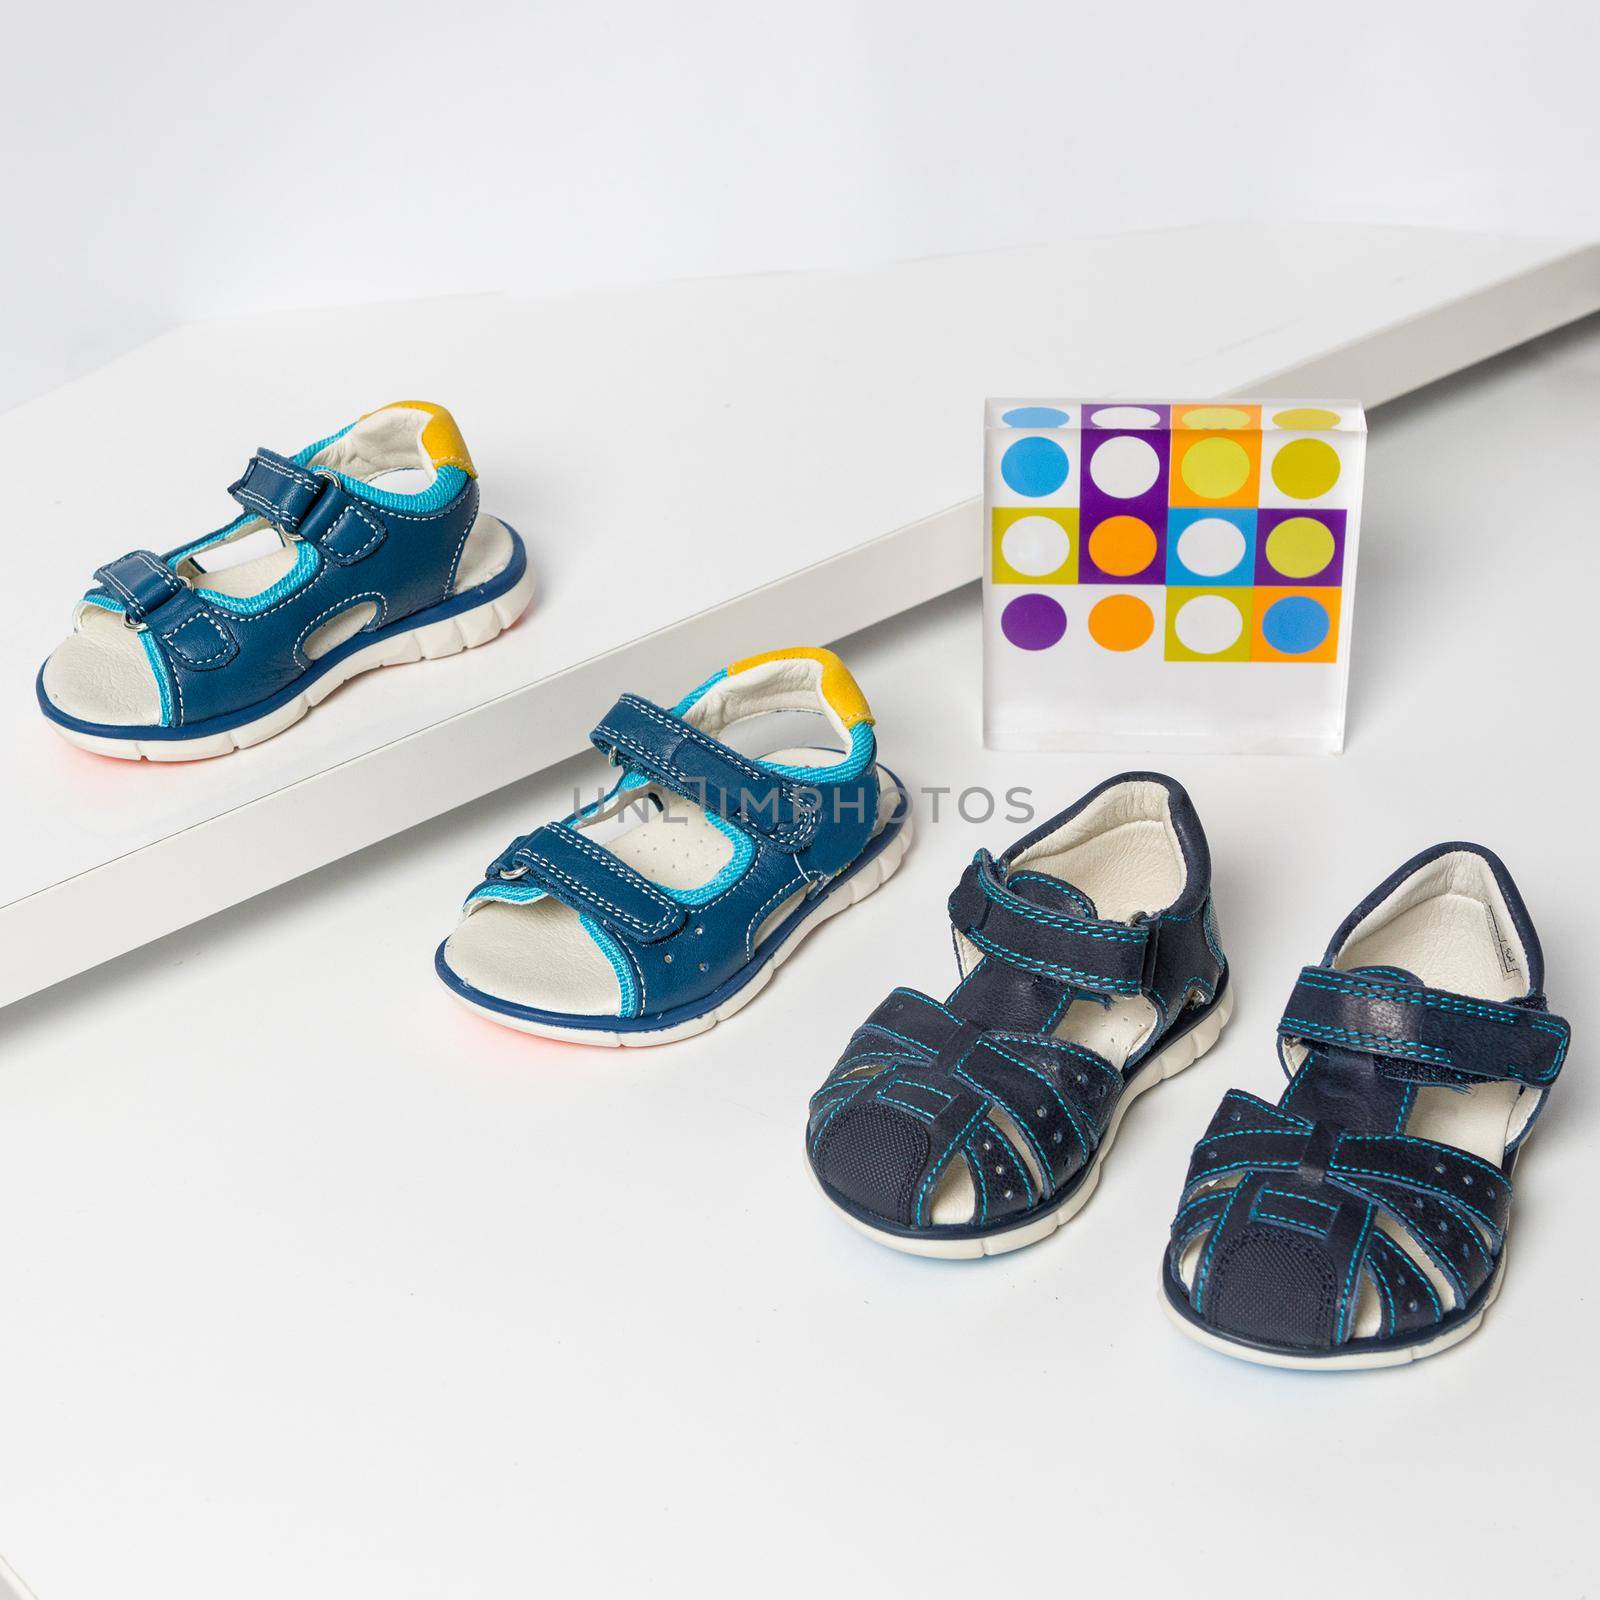 Blue kids sandals on a white background by ferhad